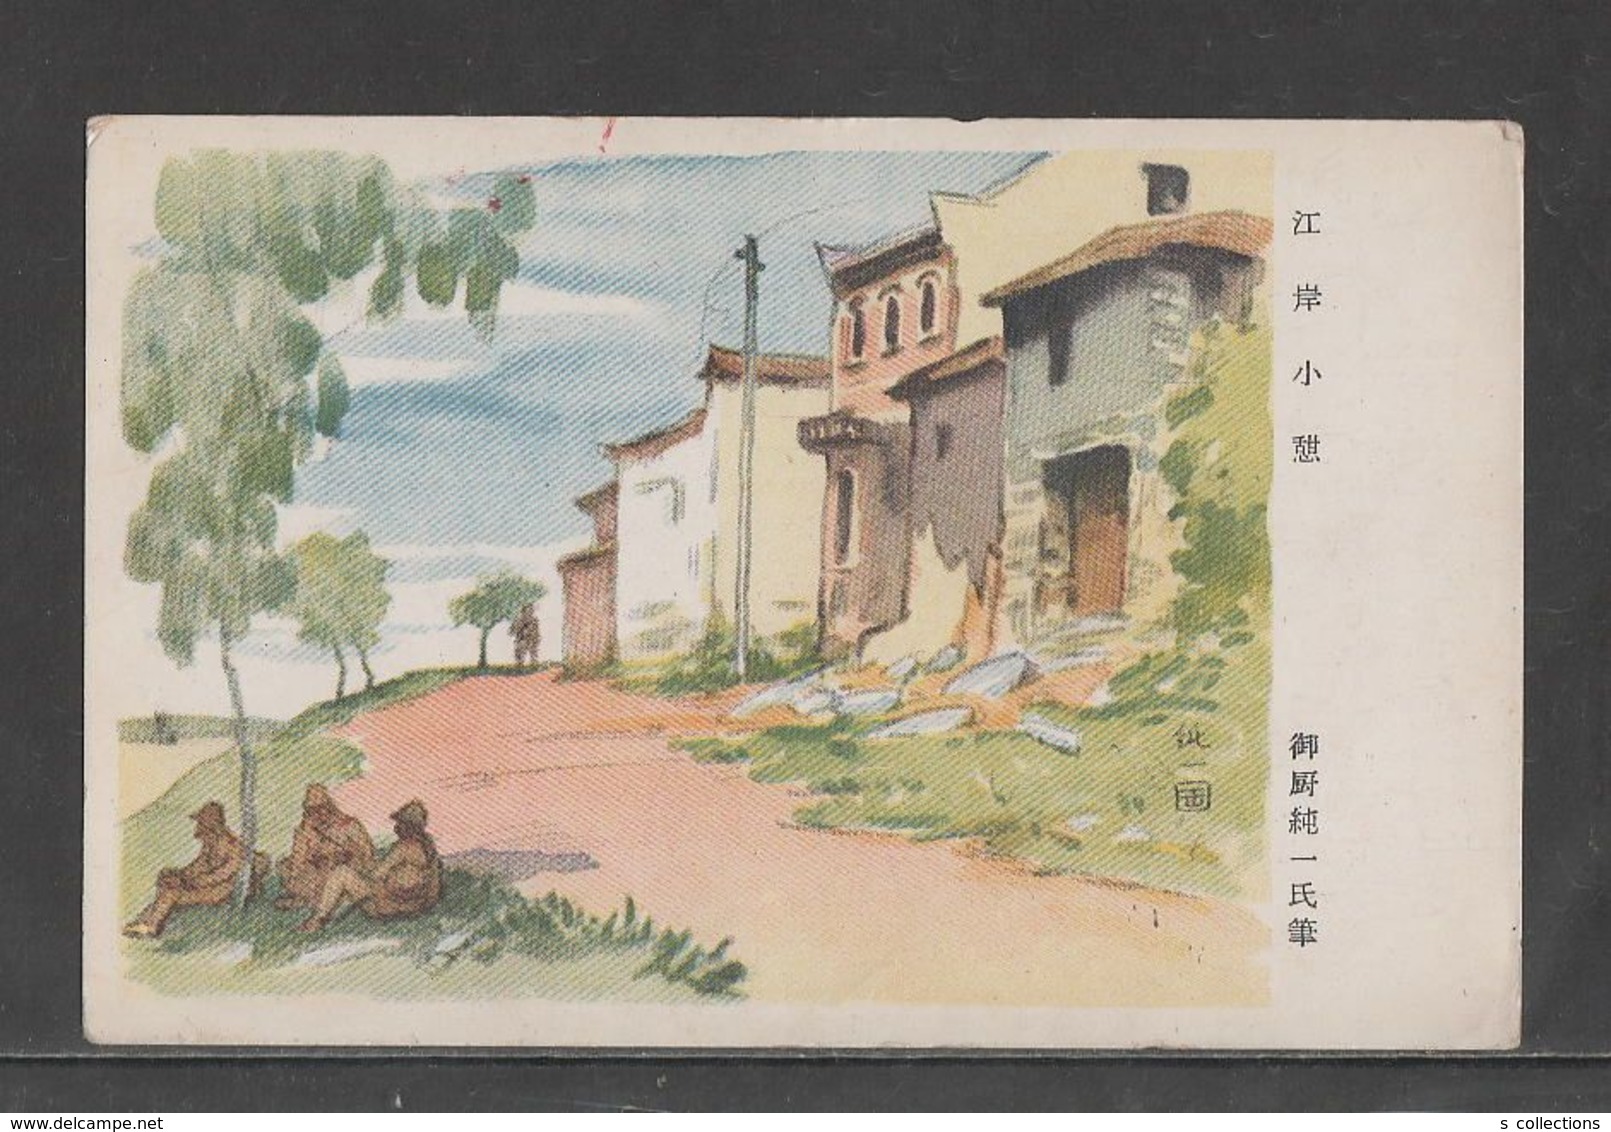 JAPAN WWII Military Jiang'an Picture Postcard NORTH CHINA Beijing WW2 MANCHURIA CHINE MANDCHOUKOUO JAPON GIAPPONE - 1941-45 Northern China